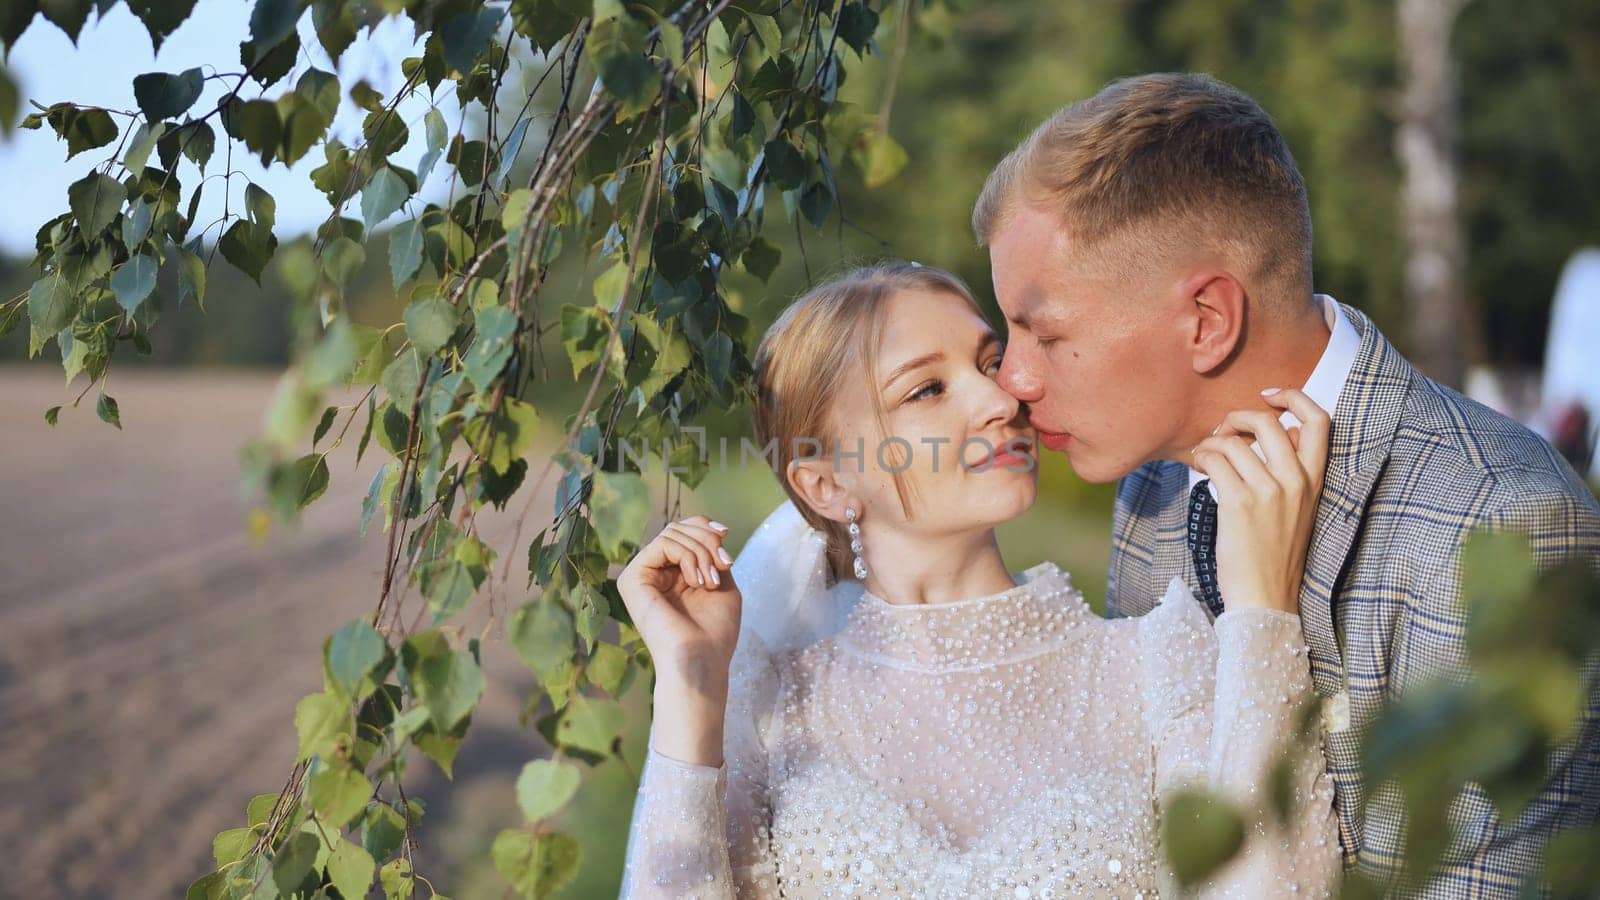 The bride and groom enjoy each other by the branches of a birch tree